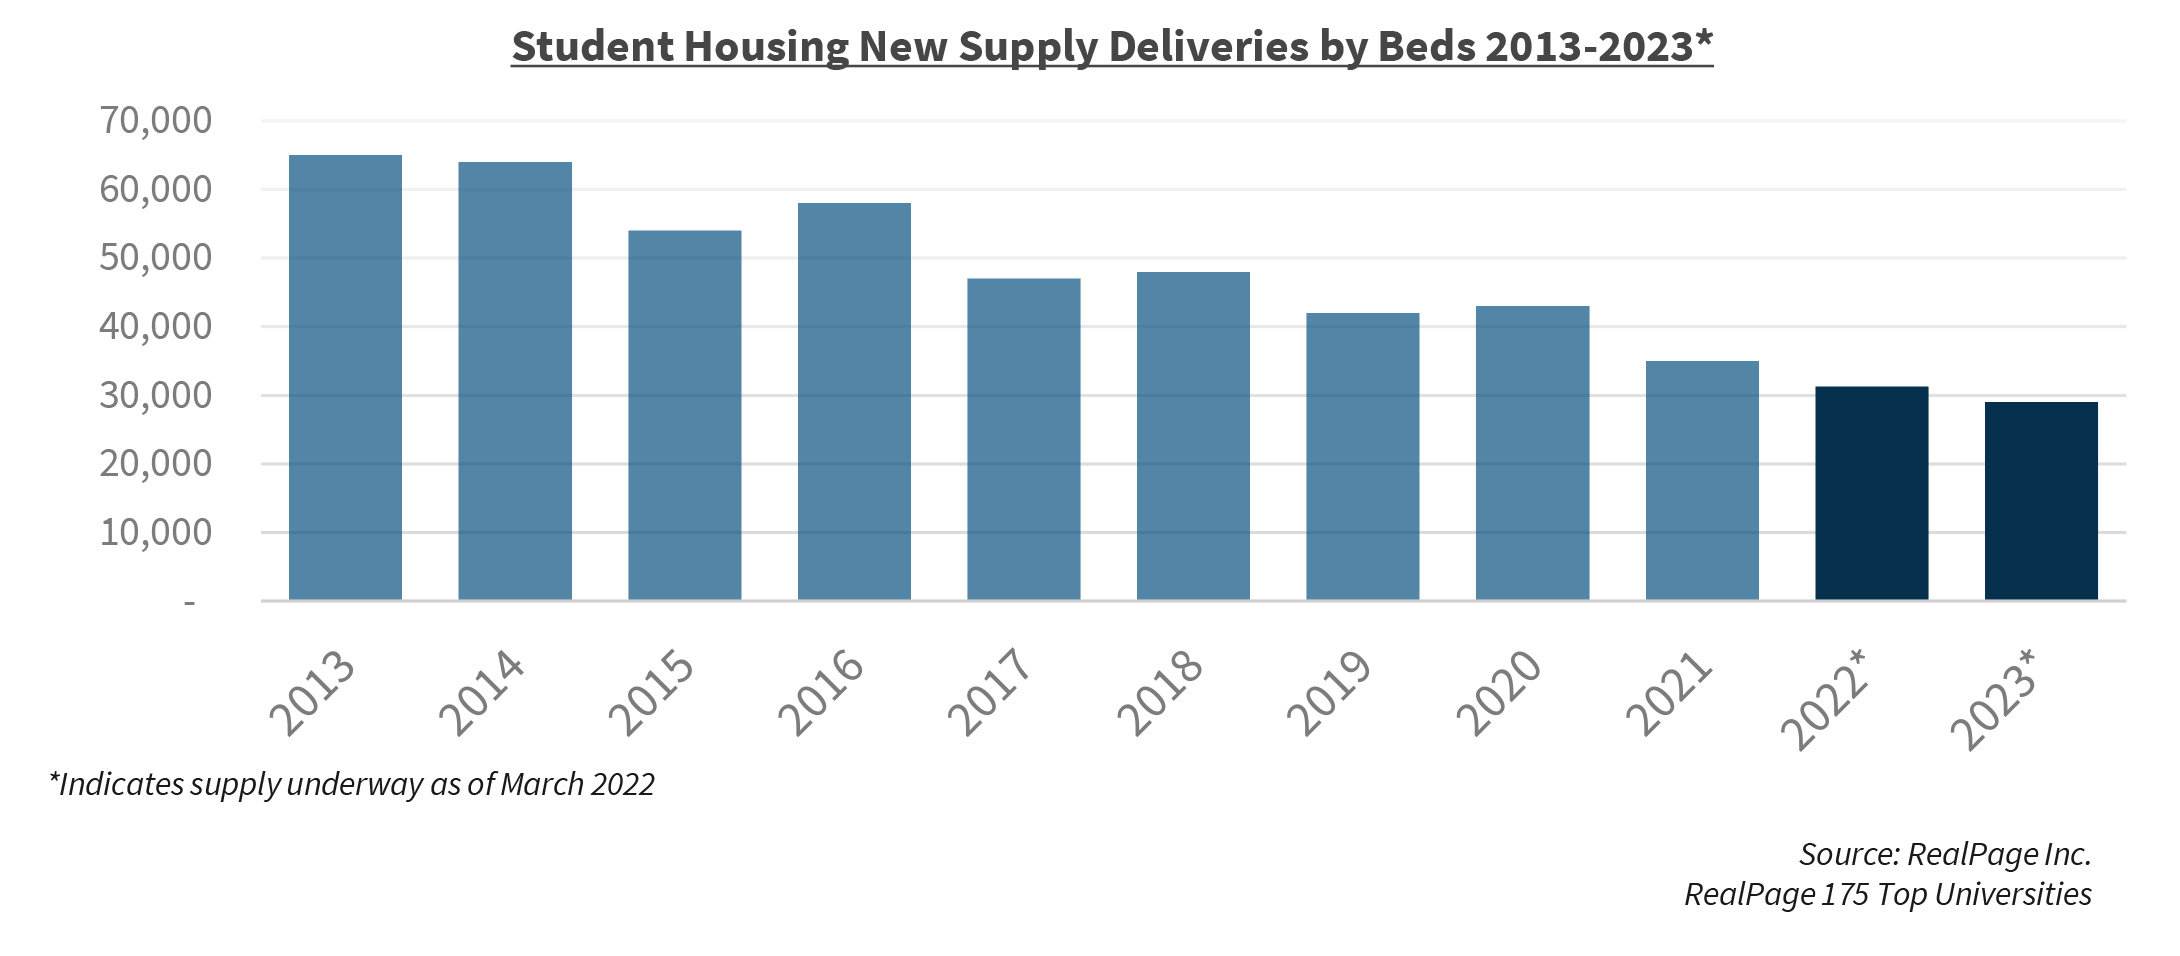 Student Housing New Supply Deliveries by Beds 2013-2023*